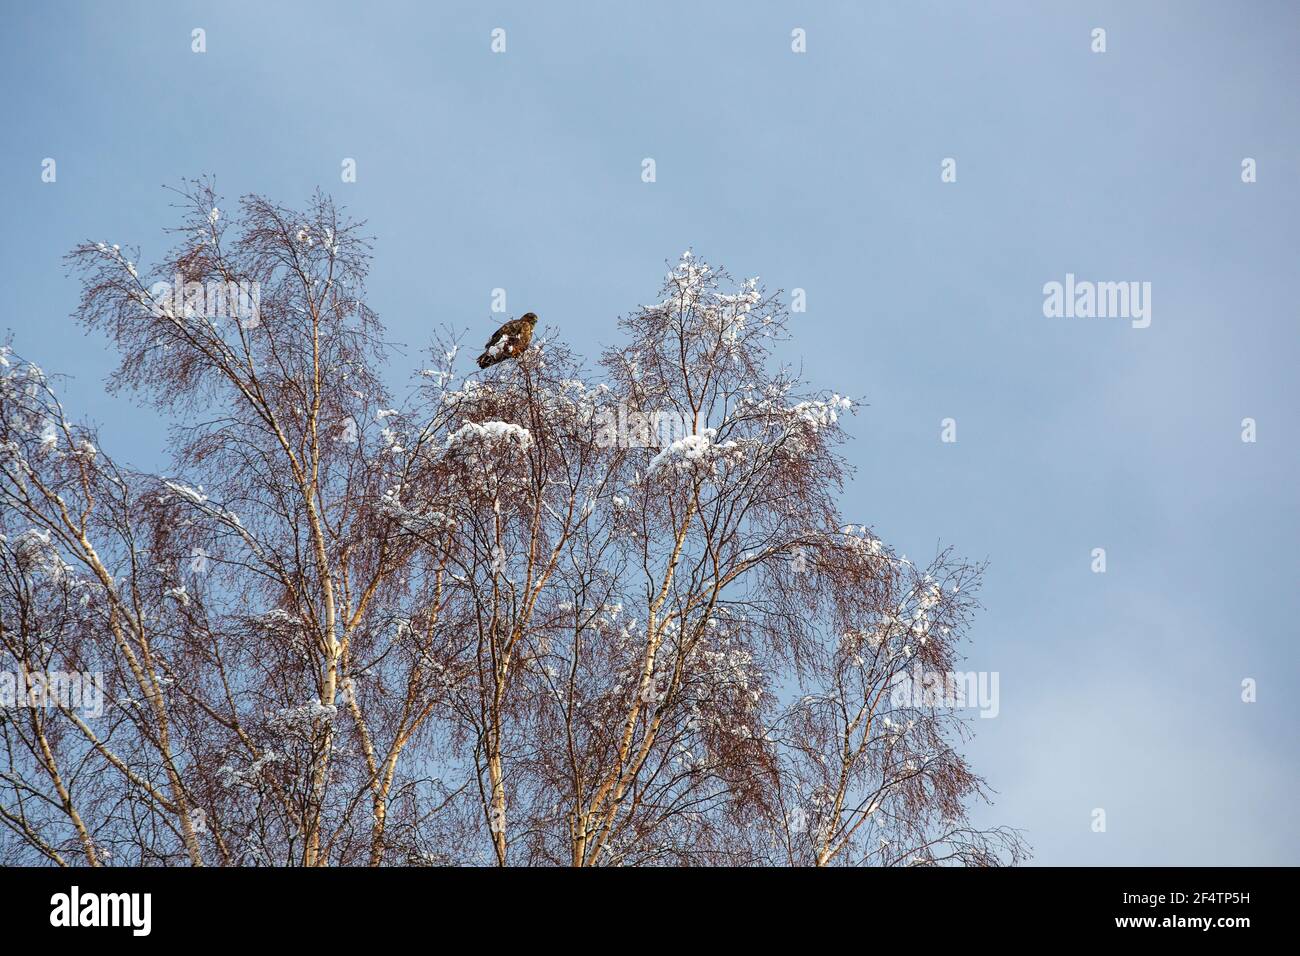 A Common Buzzard in a tree at Tarn Howes in snow, Lake Dsitrict, UK. Stock Photo